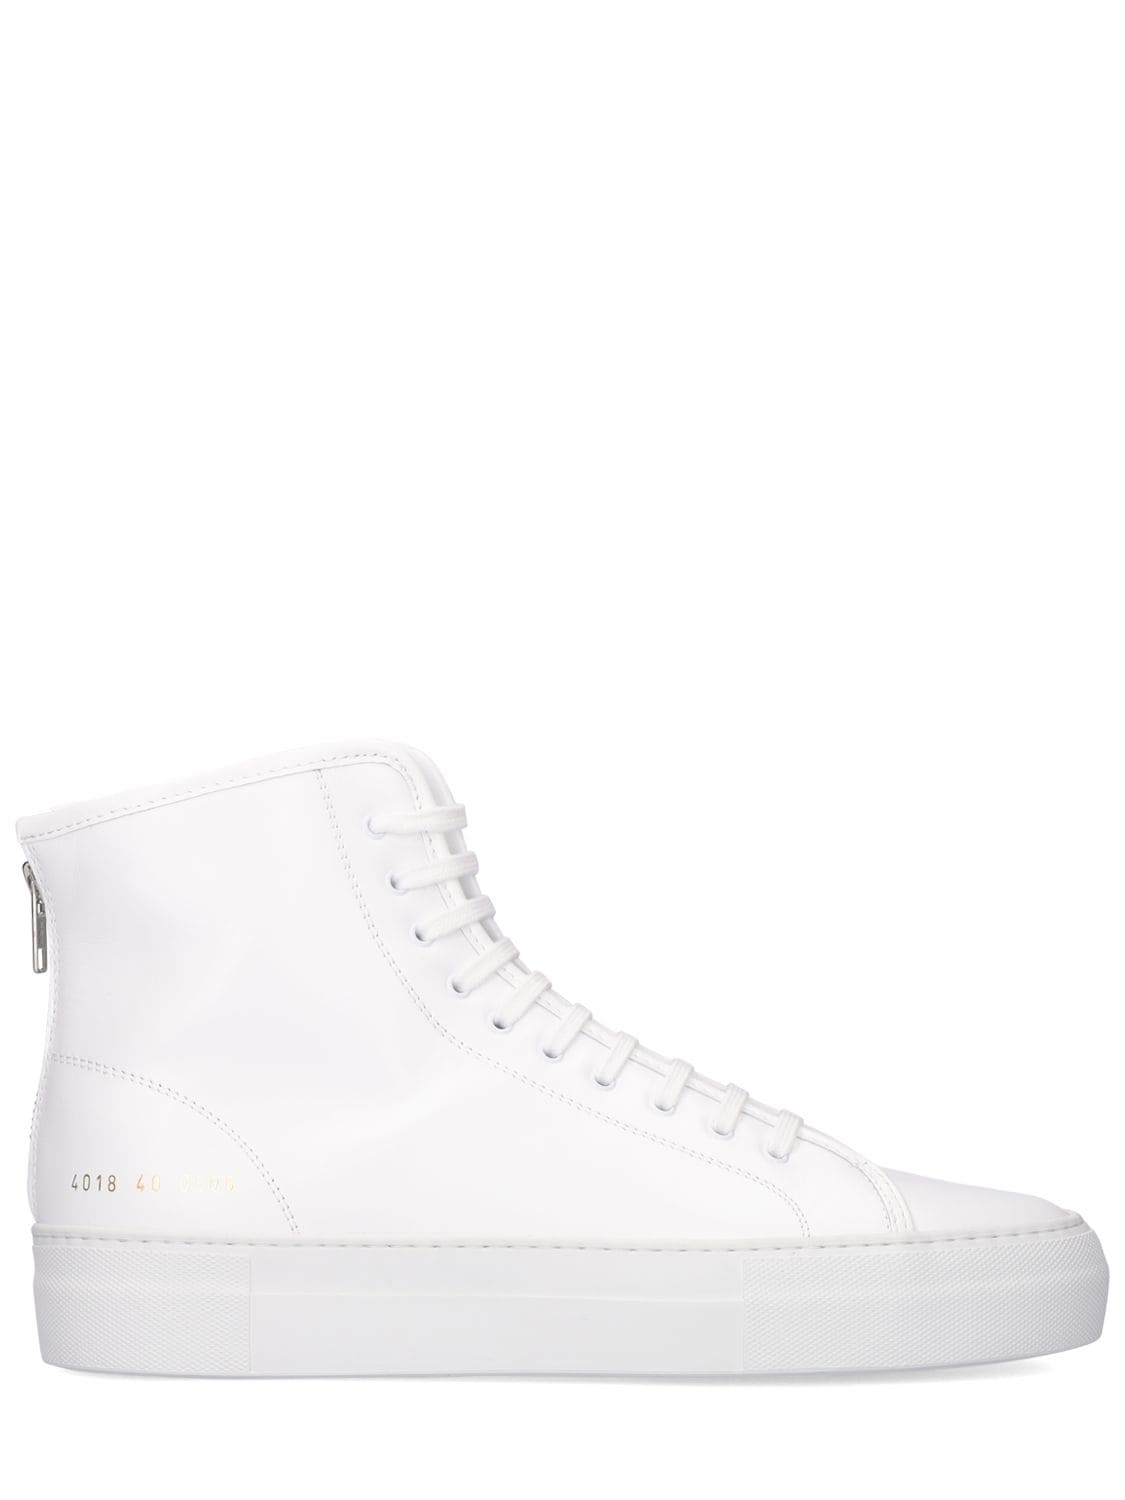 COMMON PROJECTS TOURNAMENT SUPER HIGH LEATHER SNEAKERS